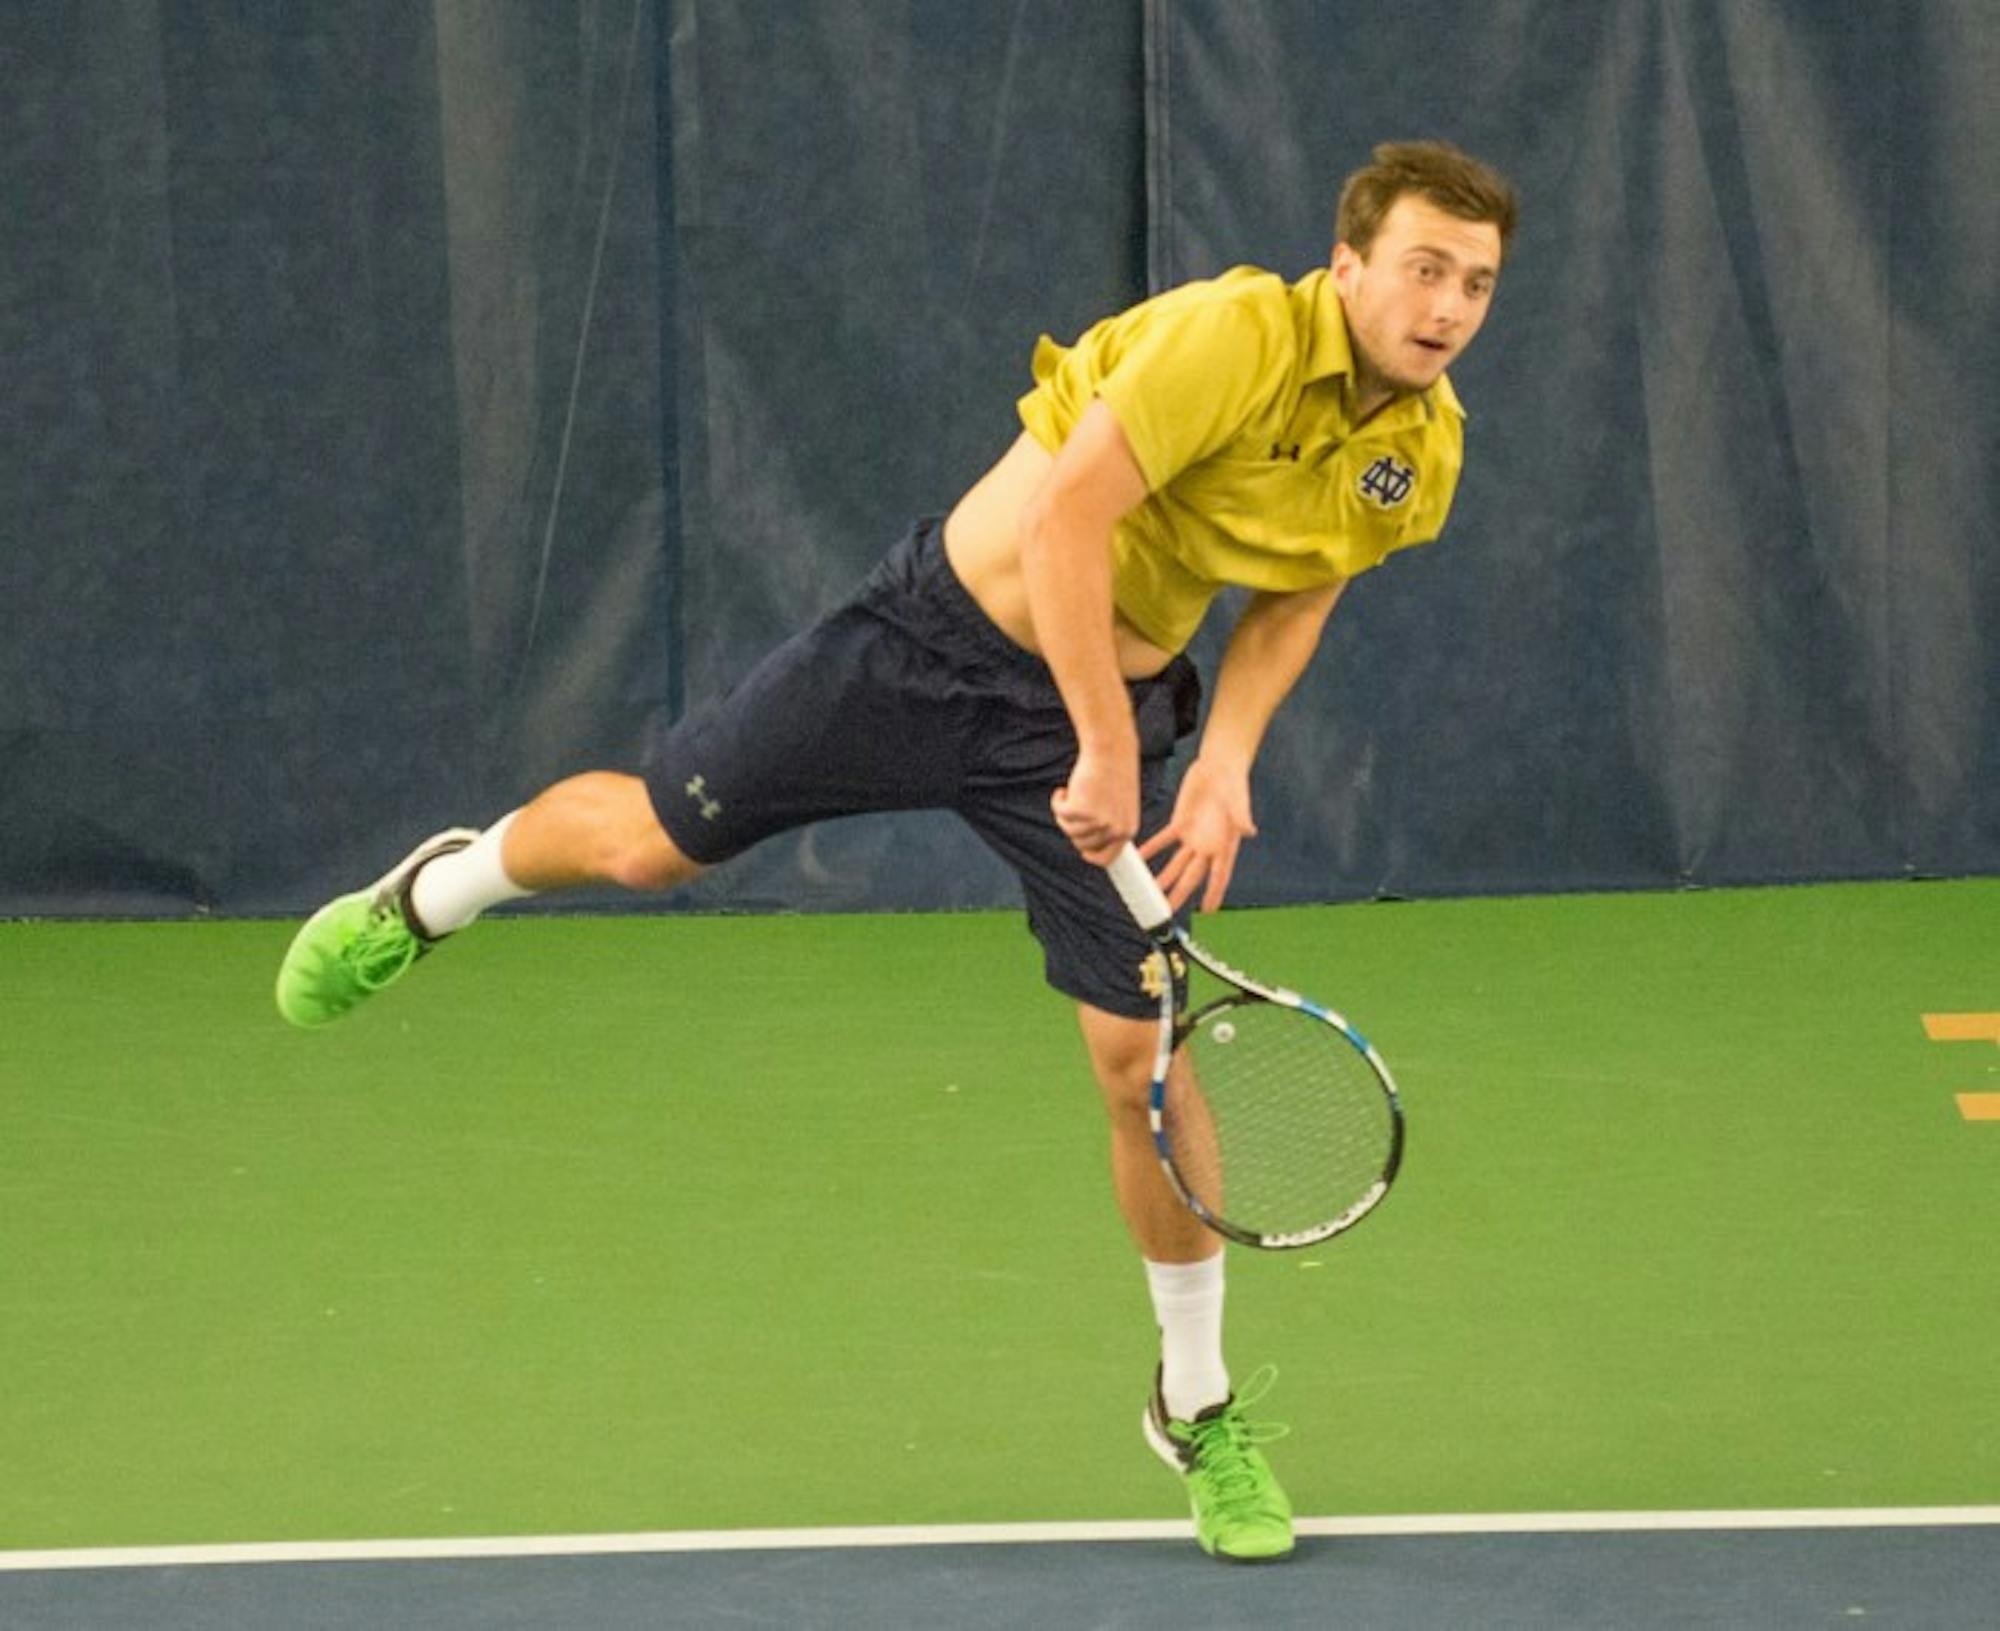 Irish senior Eddy Covalschi fires a shot over the net during Notre Dame’s 5-2 win over Duke on March 18 at Eck Tennis Pavilion.